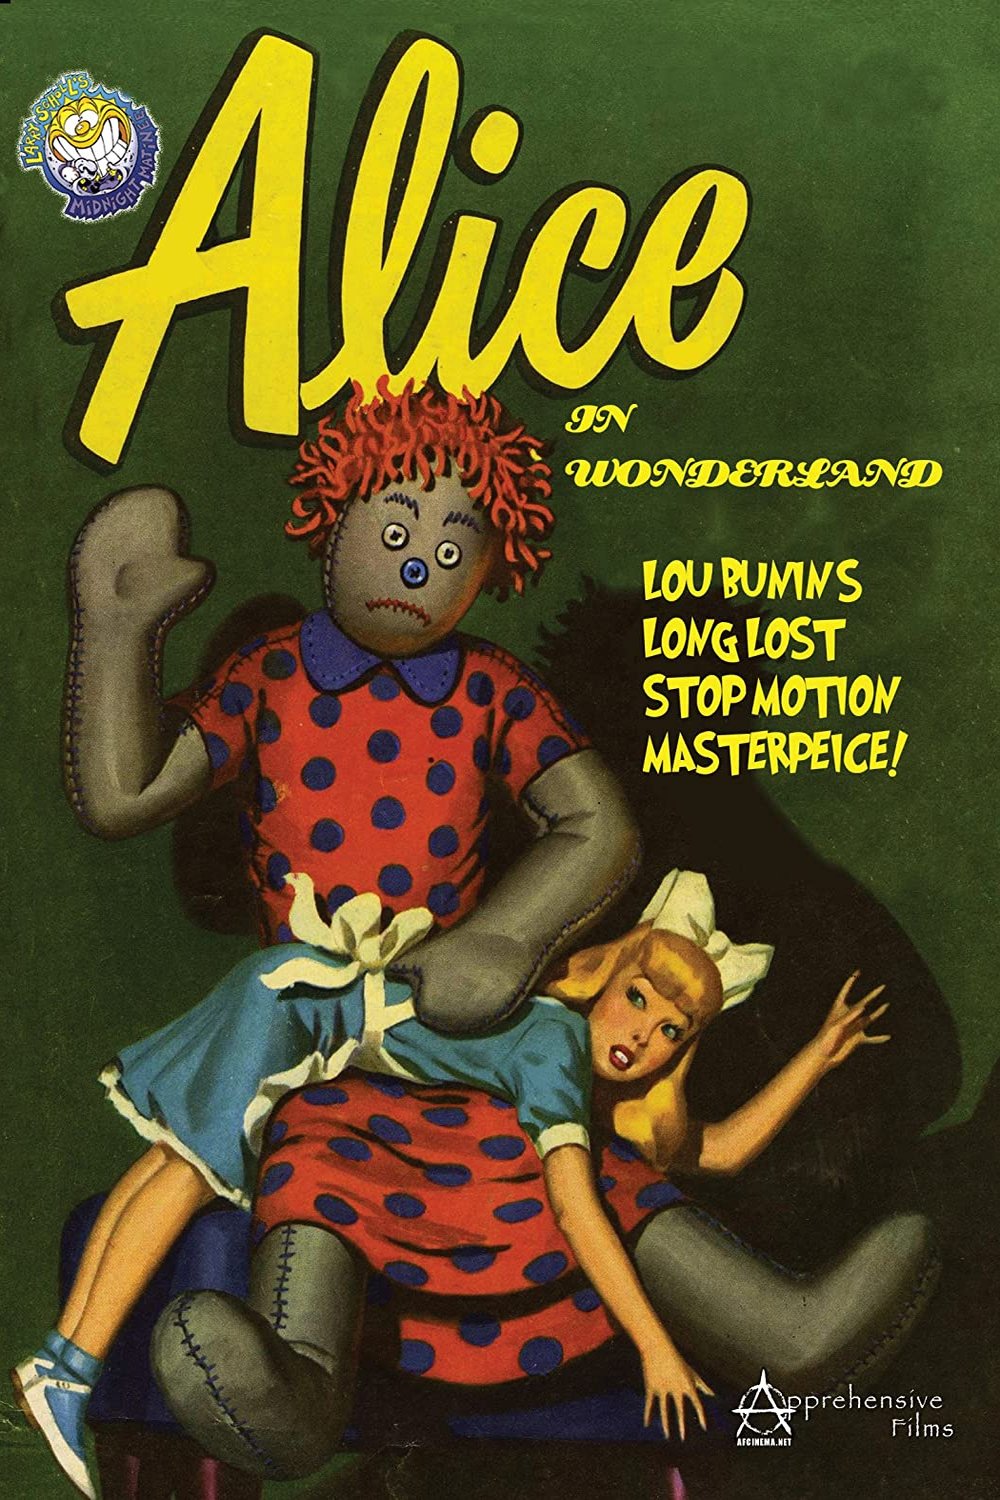 Poster of the movie Alice in Wonderland